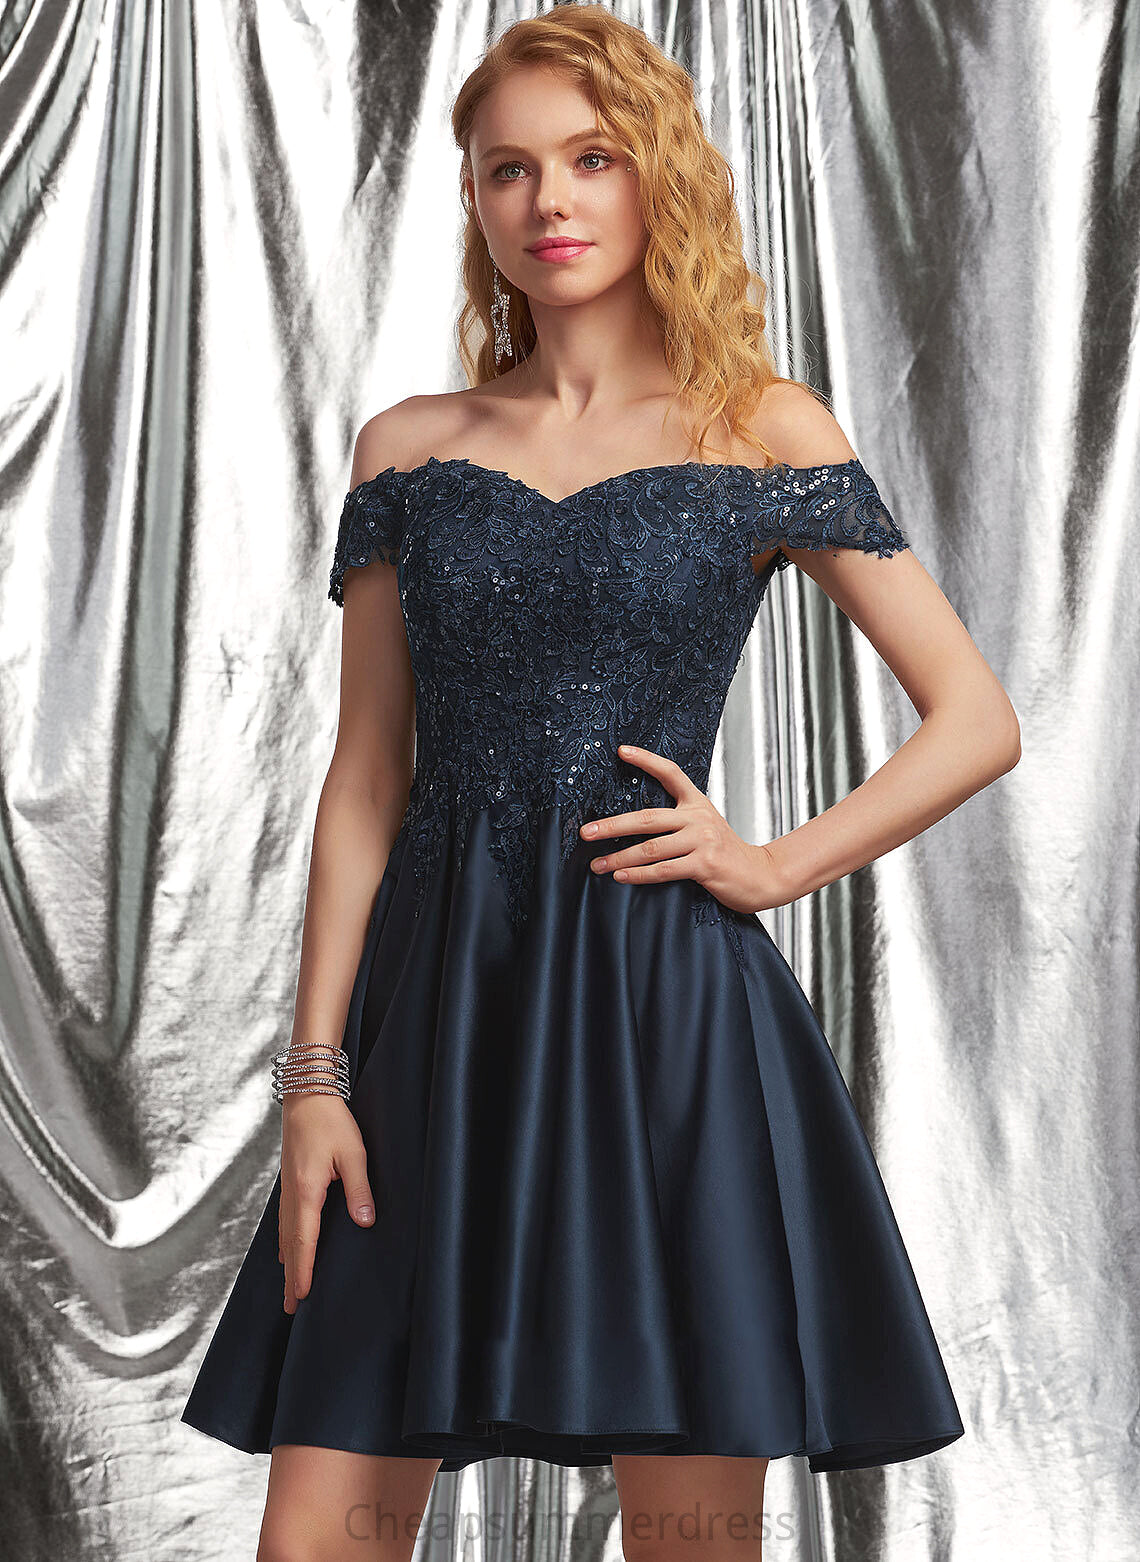 Diana Short/Mini Satin Lace Prom Dresses A-Line Off-the-Shoulder With Sequins